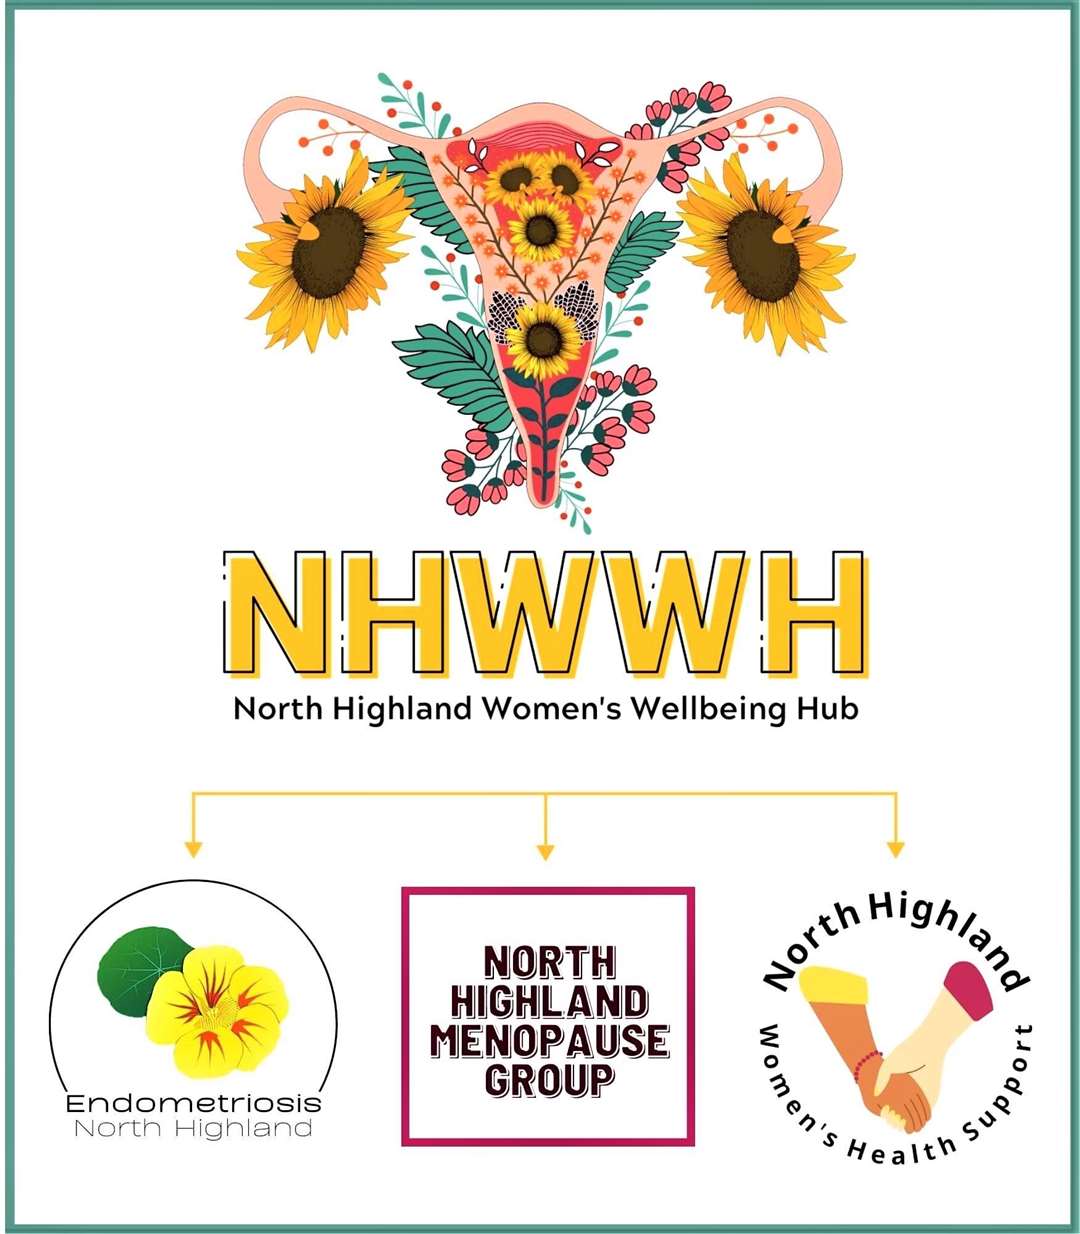 The North Highland Women't Health Hub has a new open Facebook page.